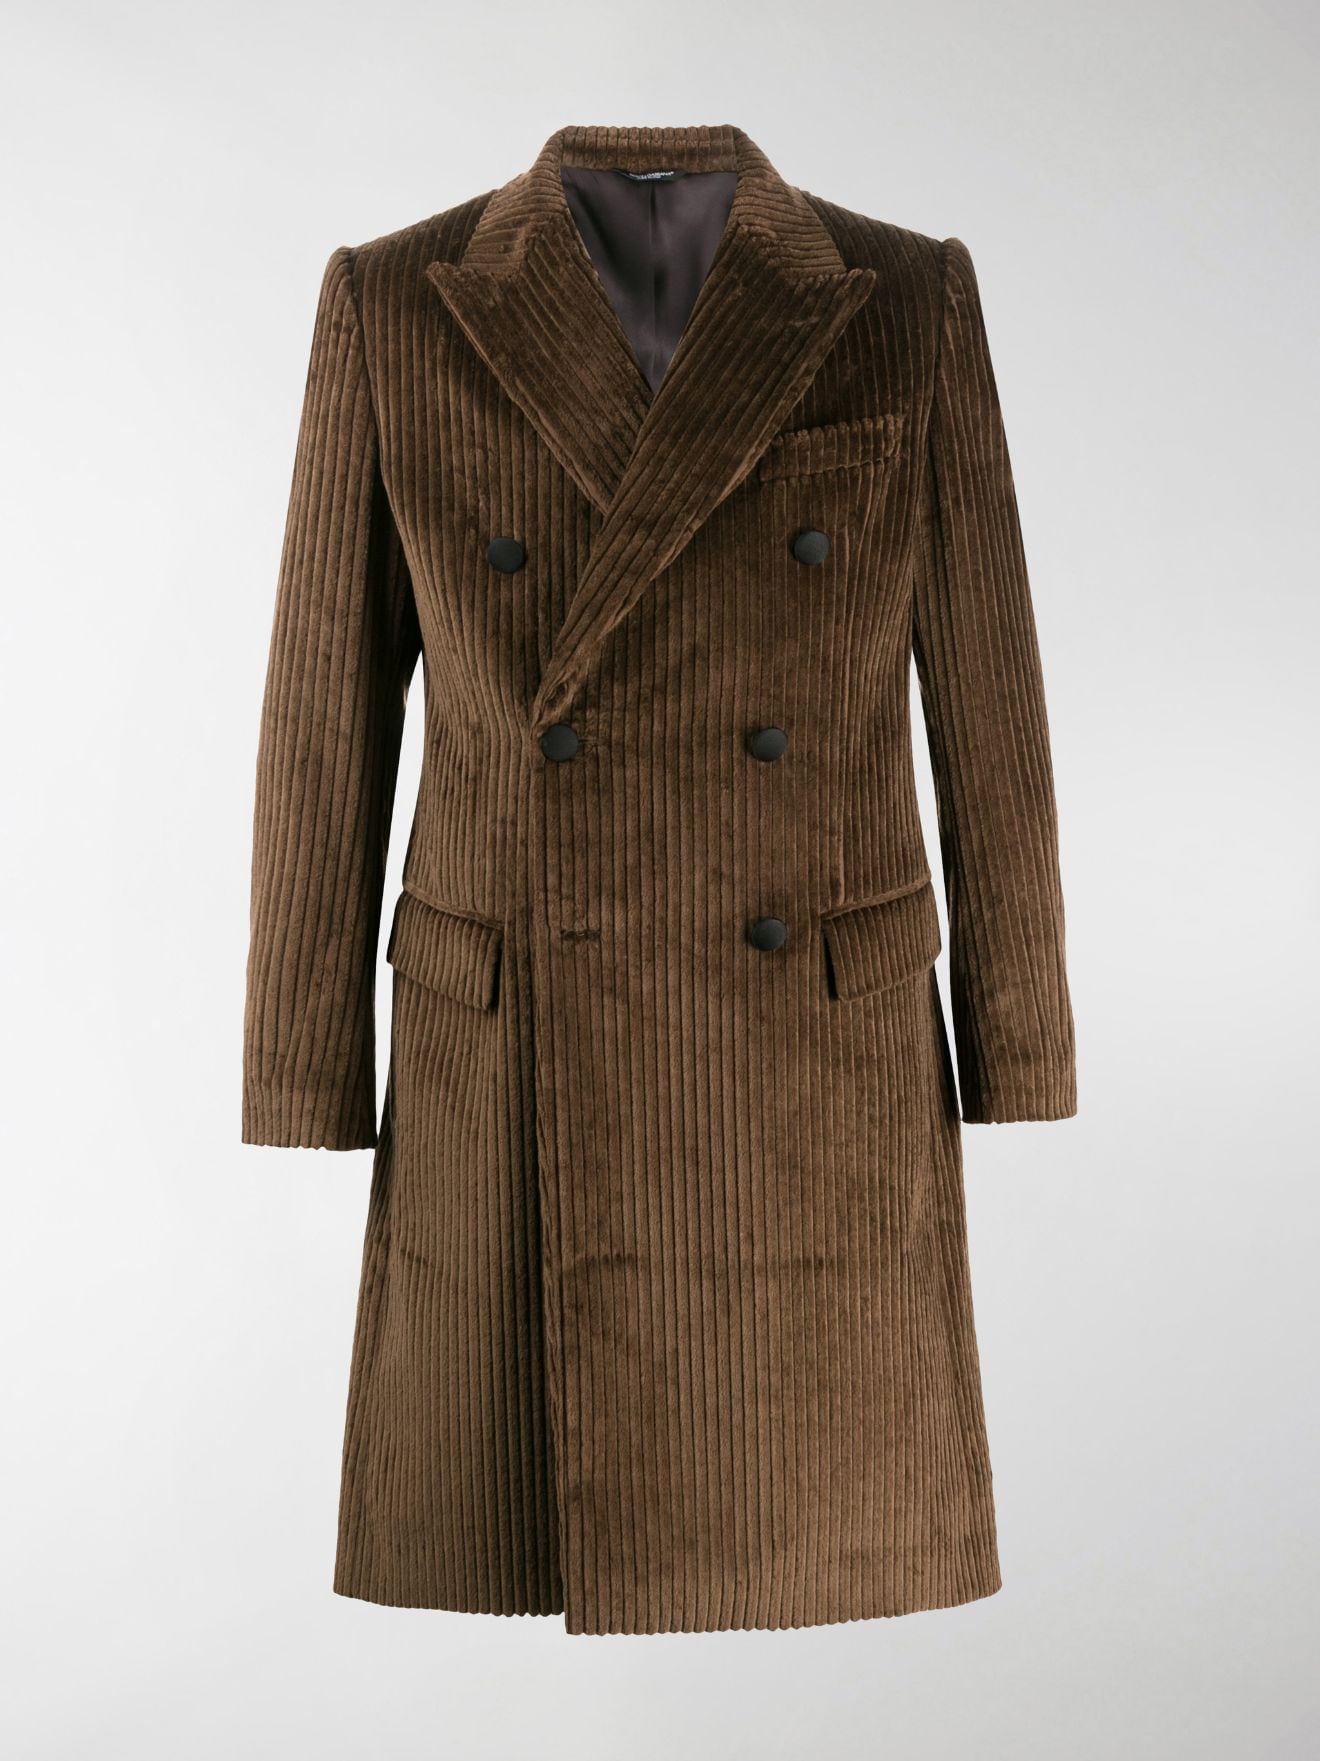 Dolce & Gabbana double-breasted corduroy coat brown | MODES